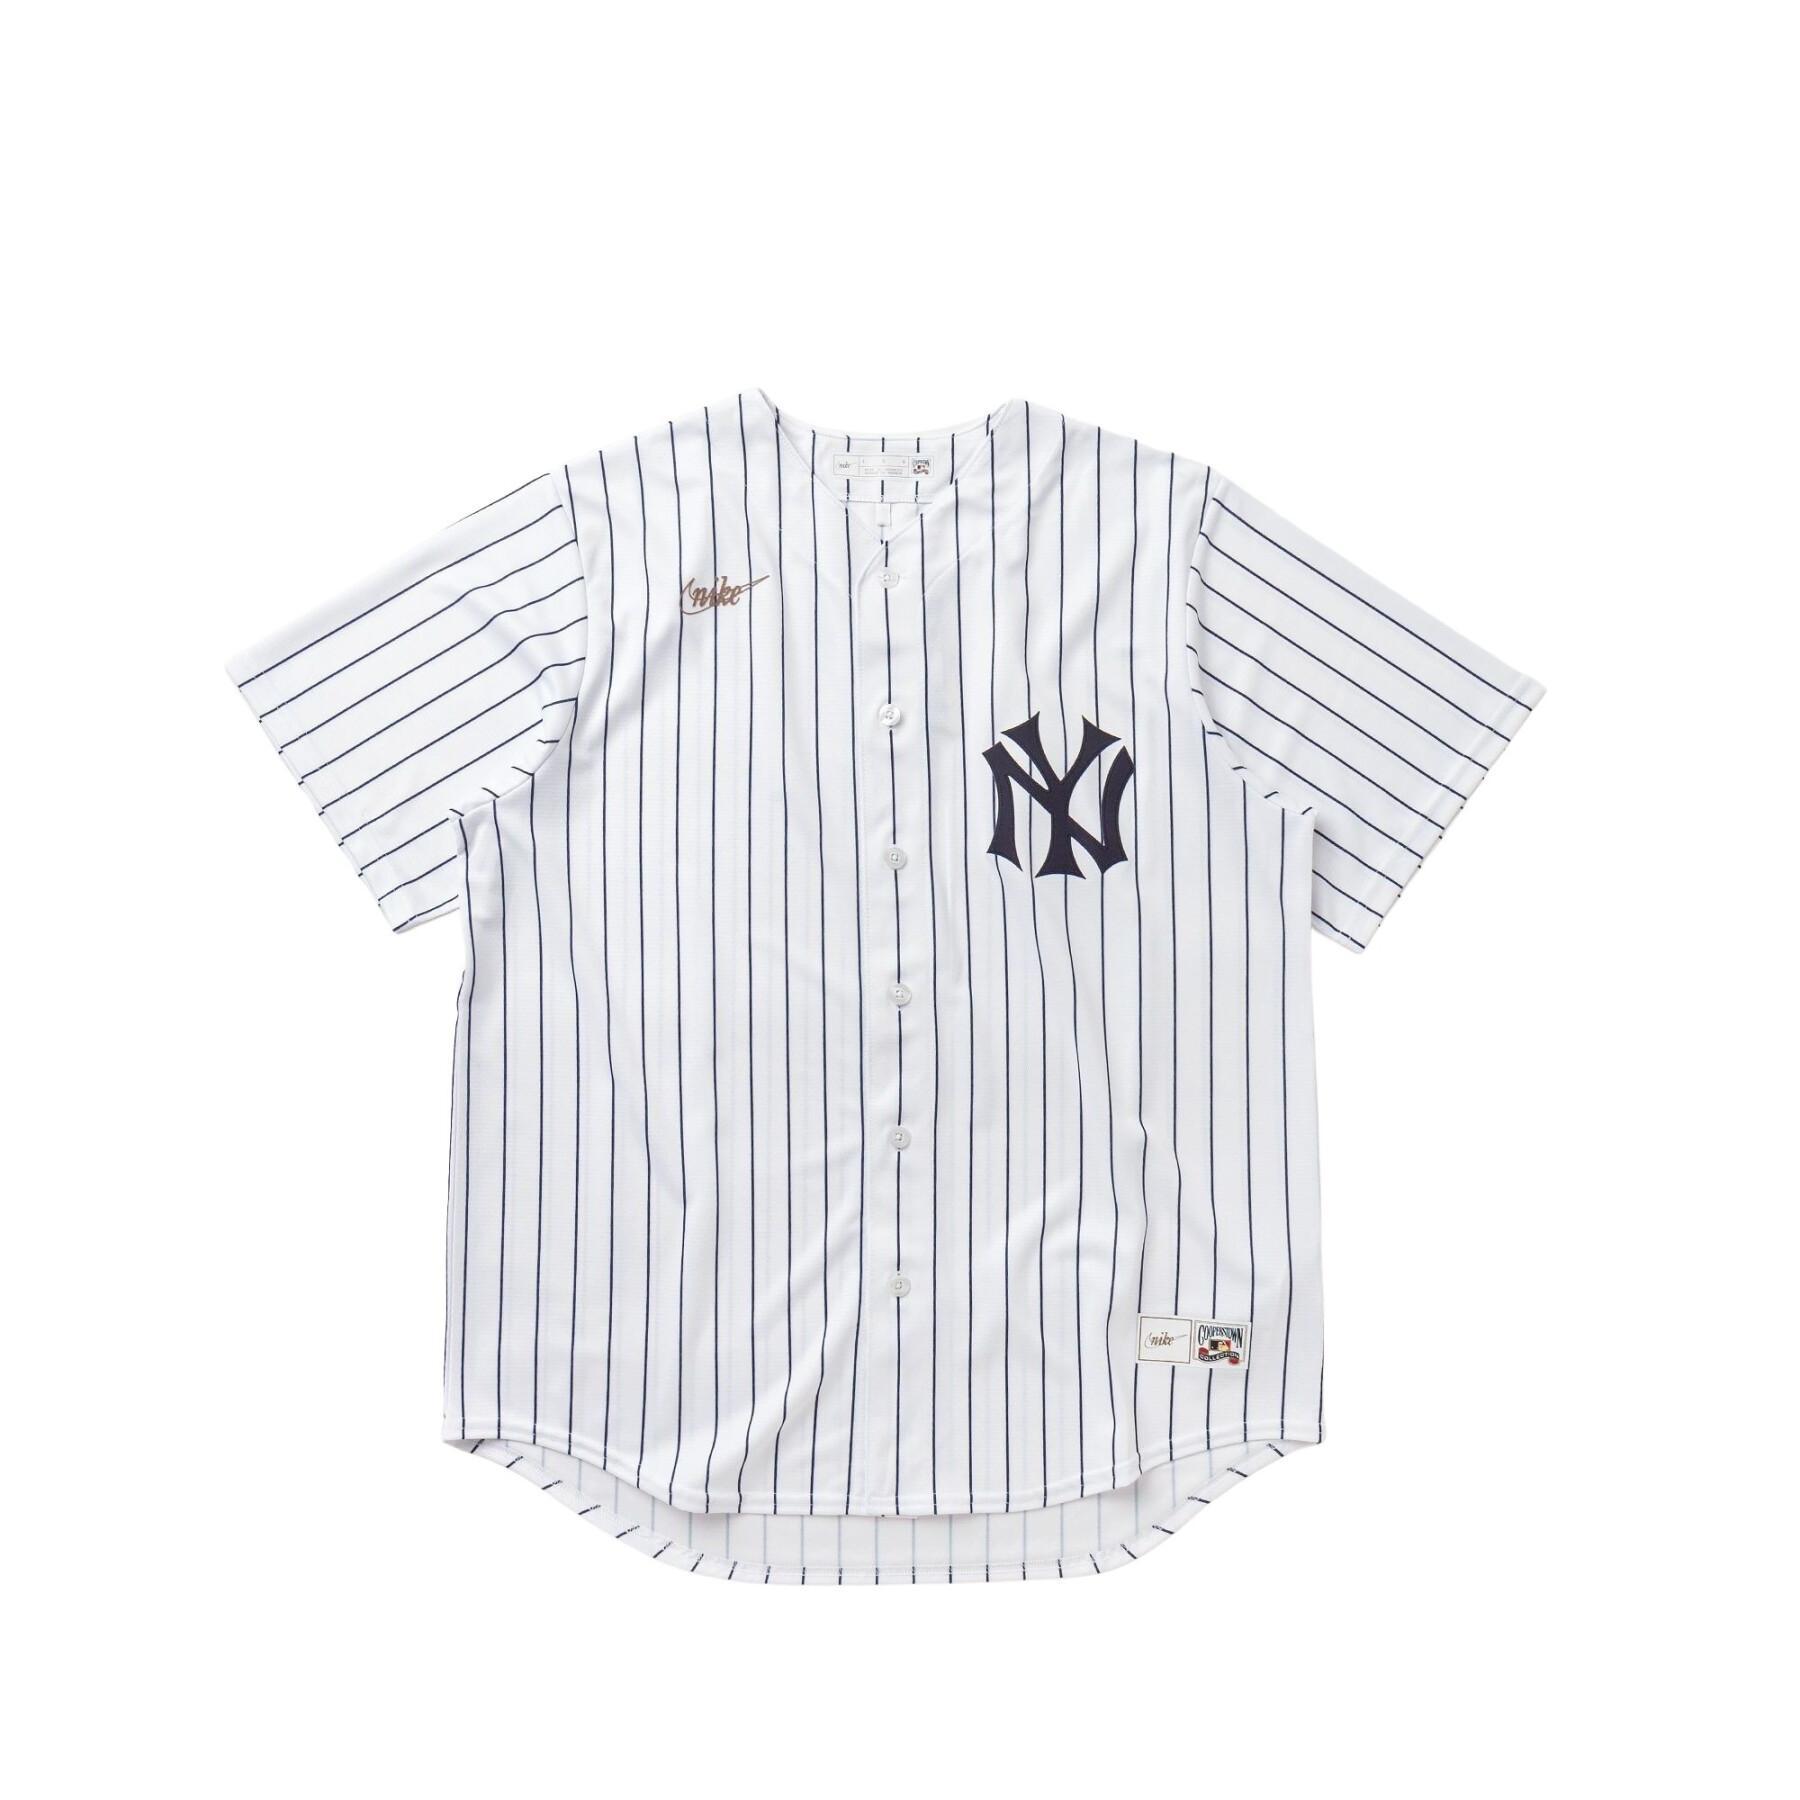 Camisola oficial New York Yankees Cooperstown